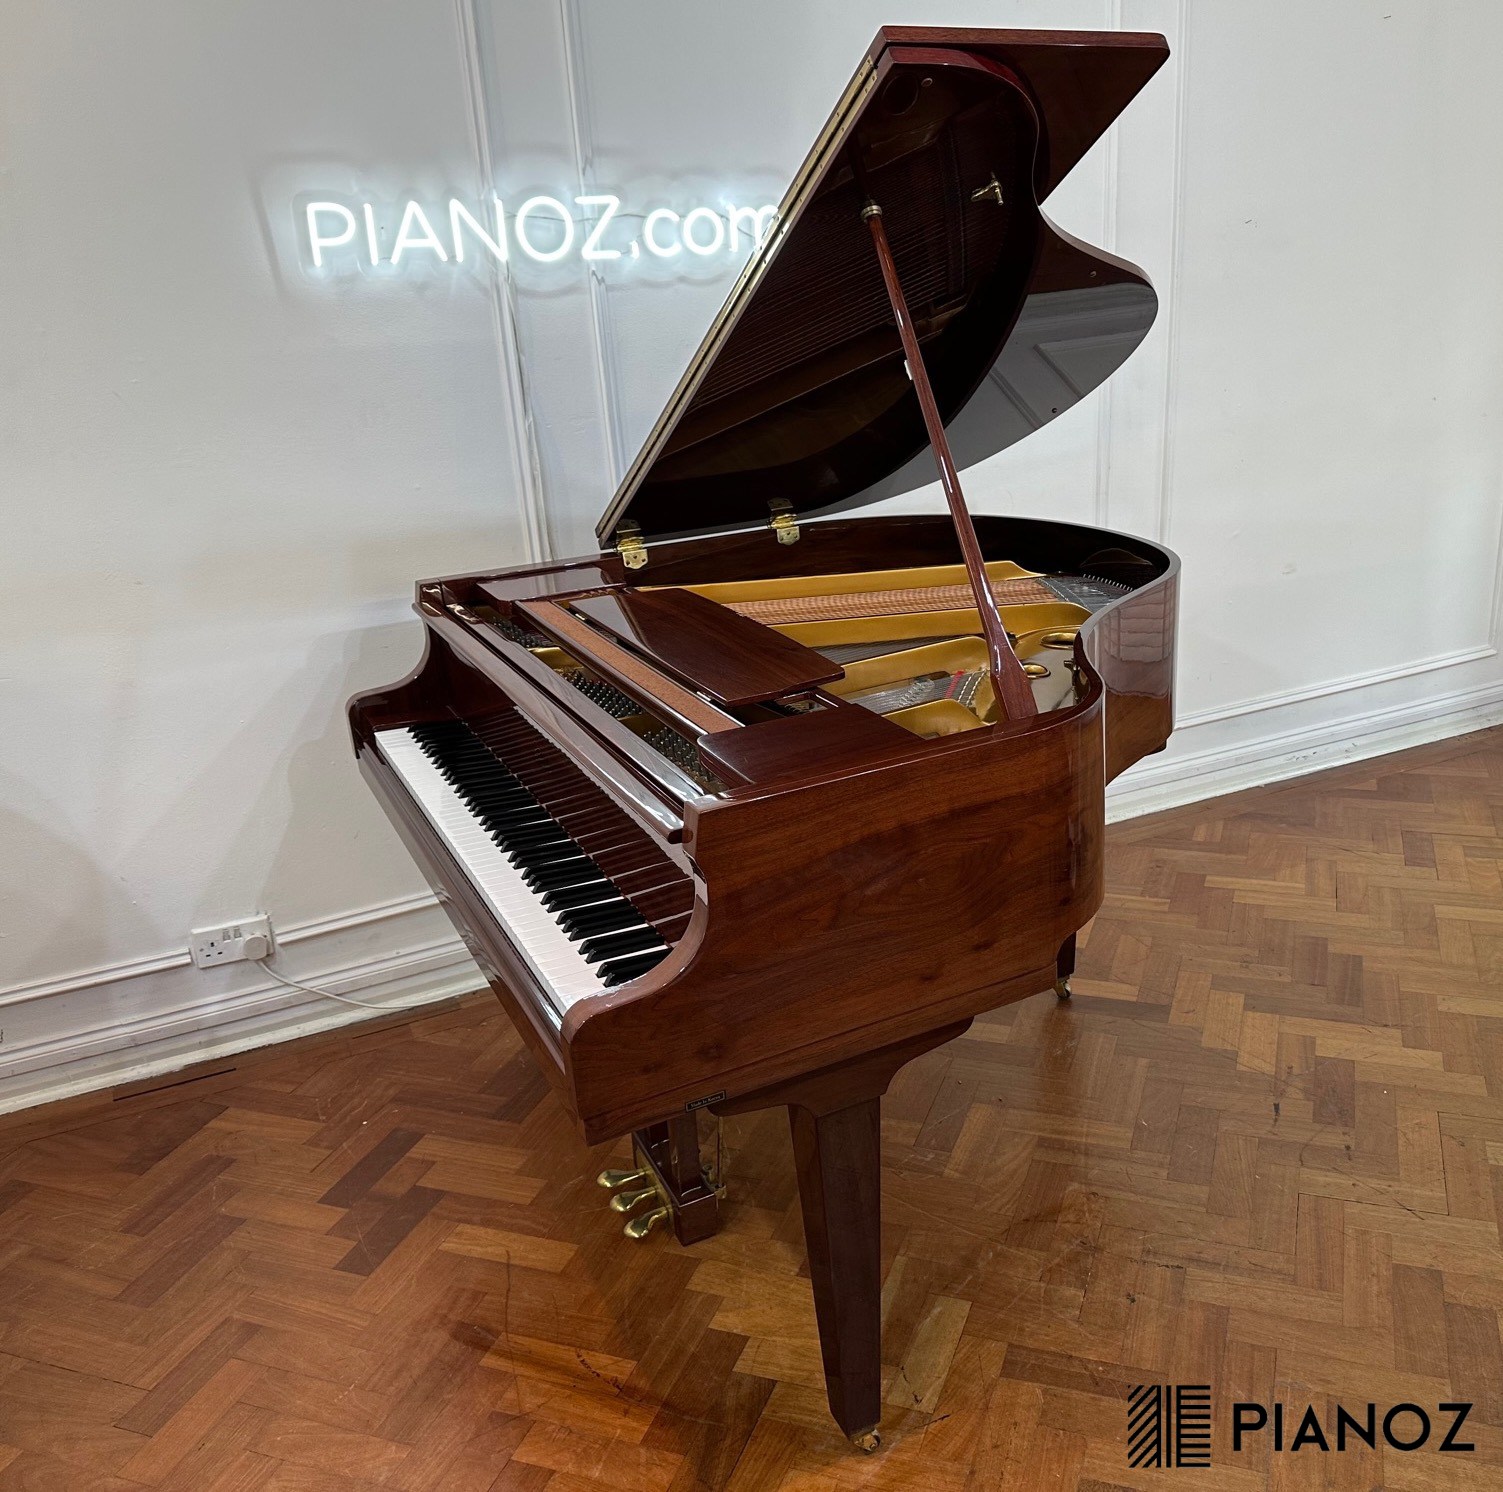 Cranes High Gloss Baby Grand Piano piano for sale in UK